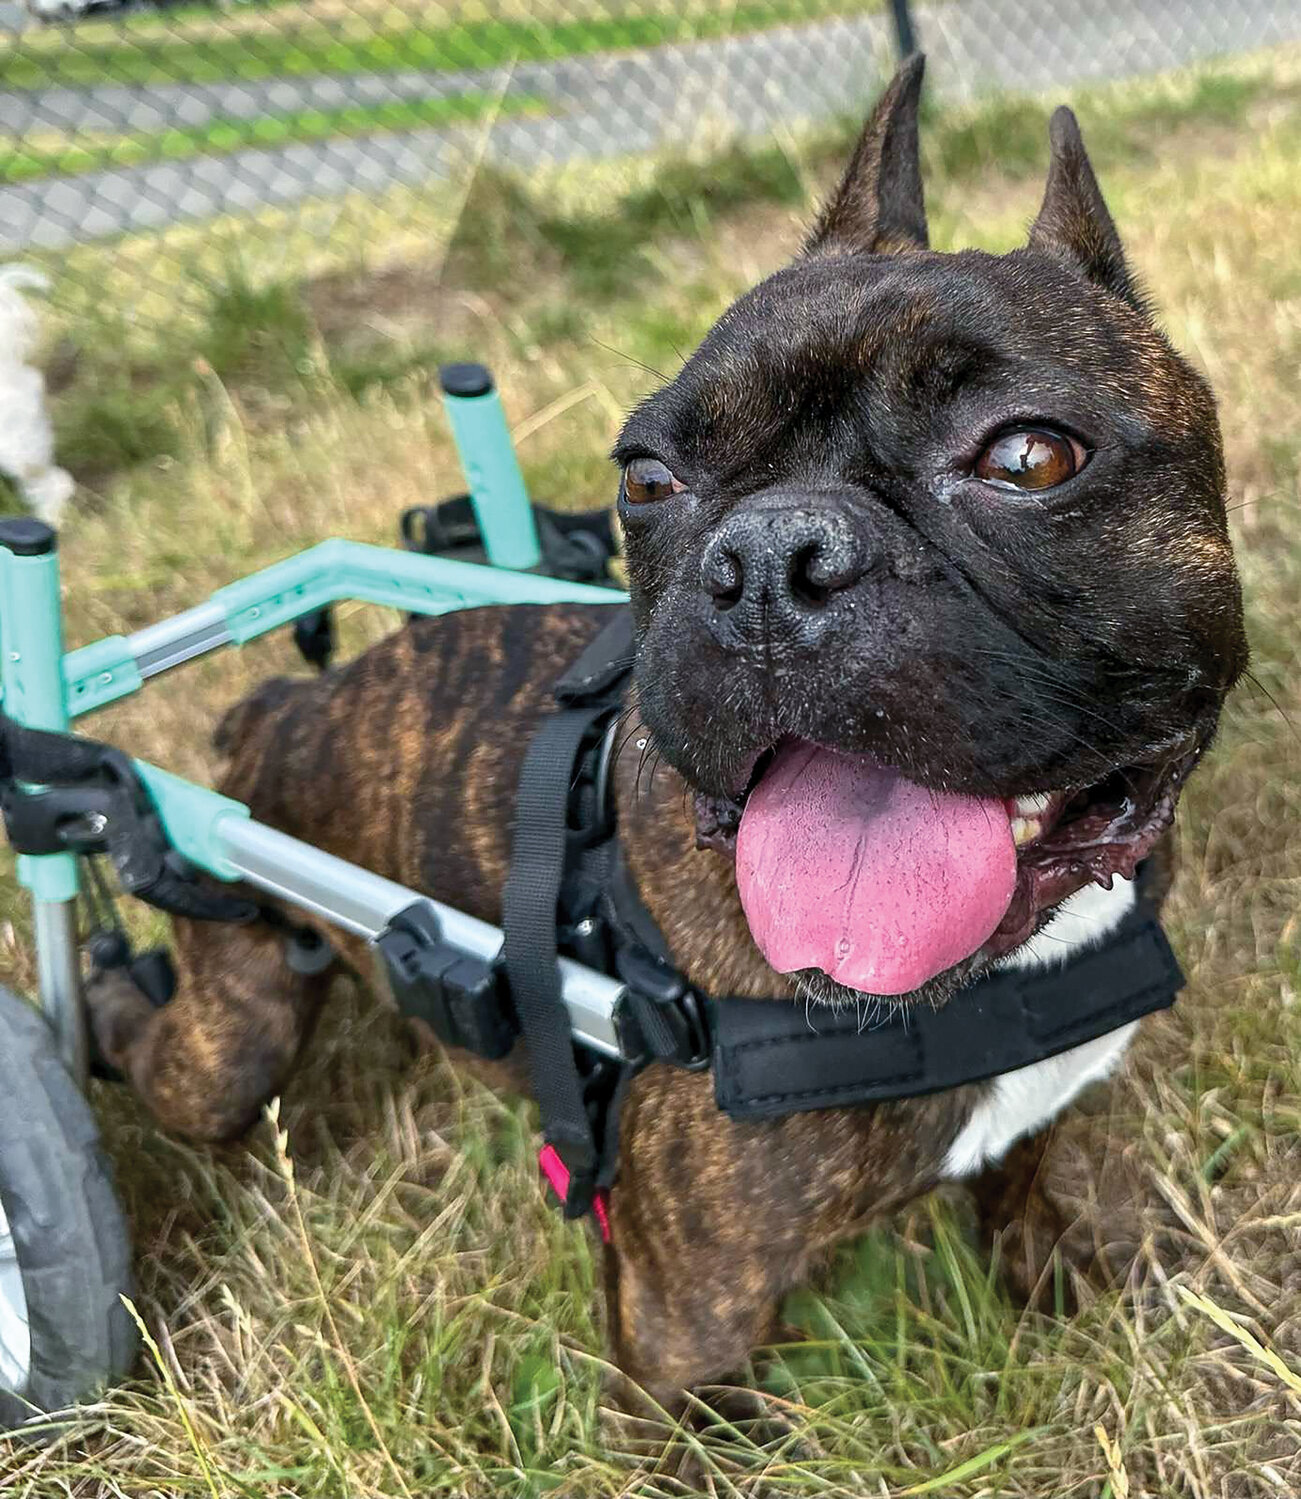 Elmo, a French bulldog who uses a mobility aid, is available for adoption via Church of Pug, an organization dedicated to helping smaller dogs in need.